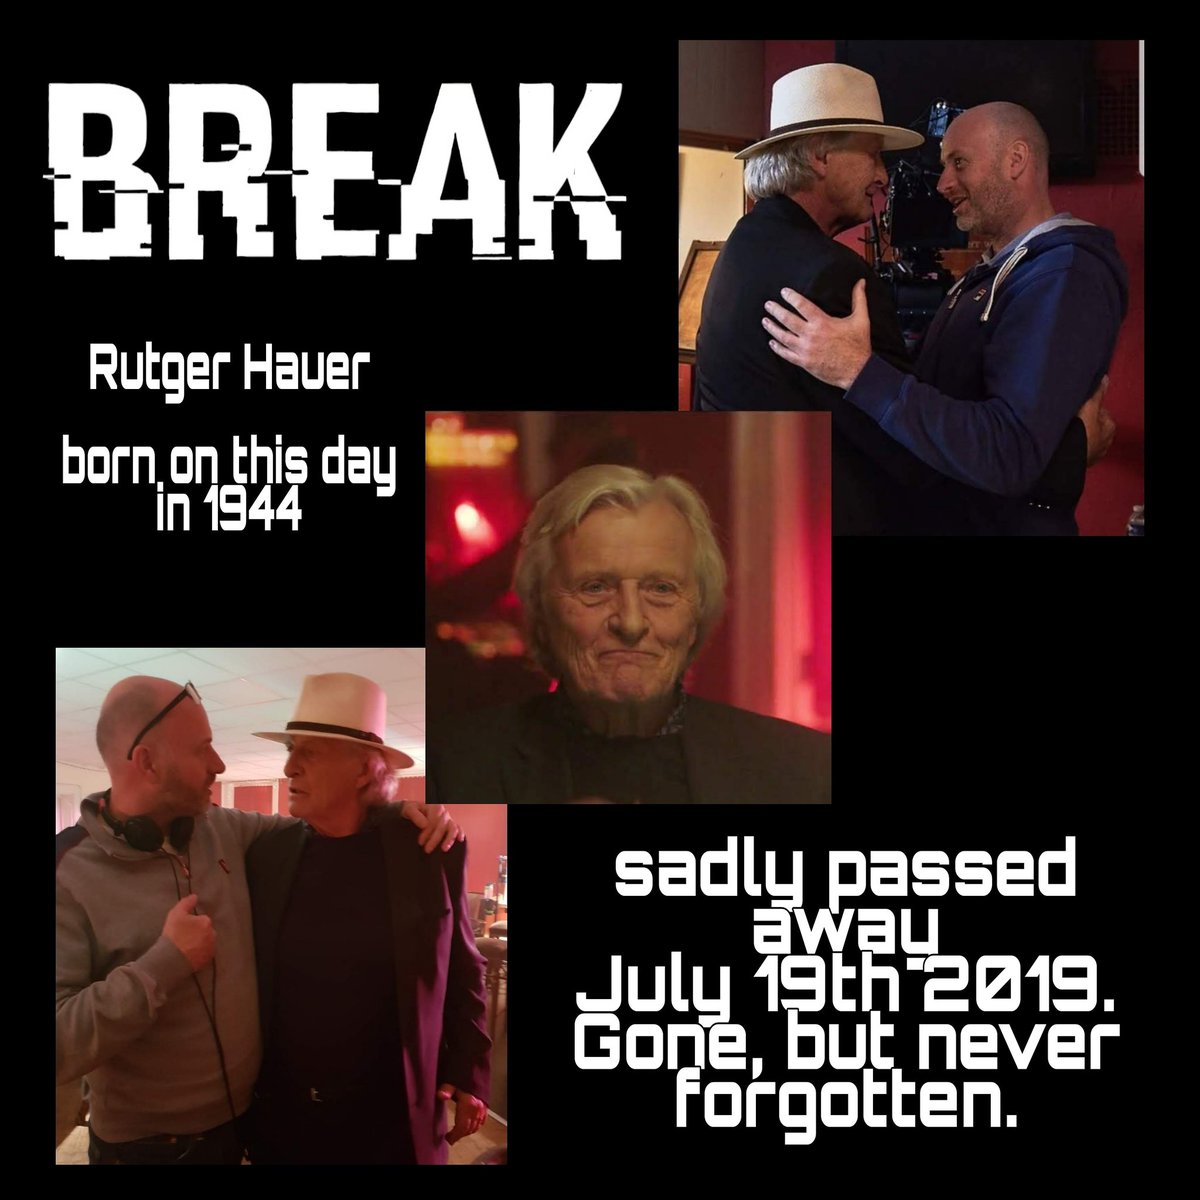 #Breaks director #MichaelElkin remembers #RutgerHauer today on what would have been his 77th birthday. I consider myself extremely fortunate that he was in my debut feature film #Break and will always be grateful. I will also remember him with fondness. #rip #Bladerunner